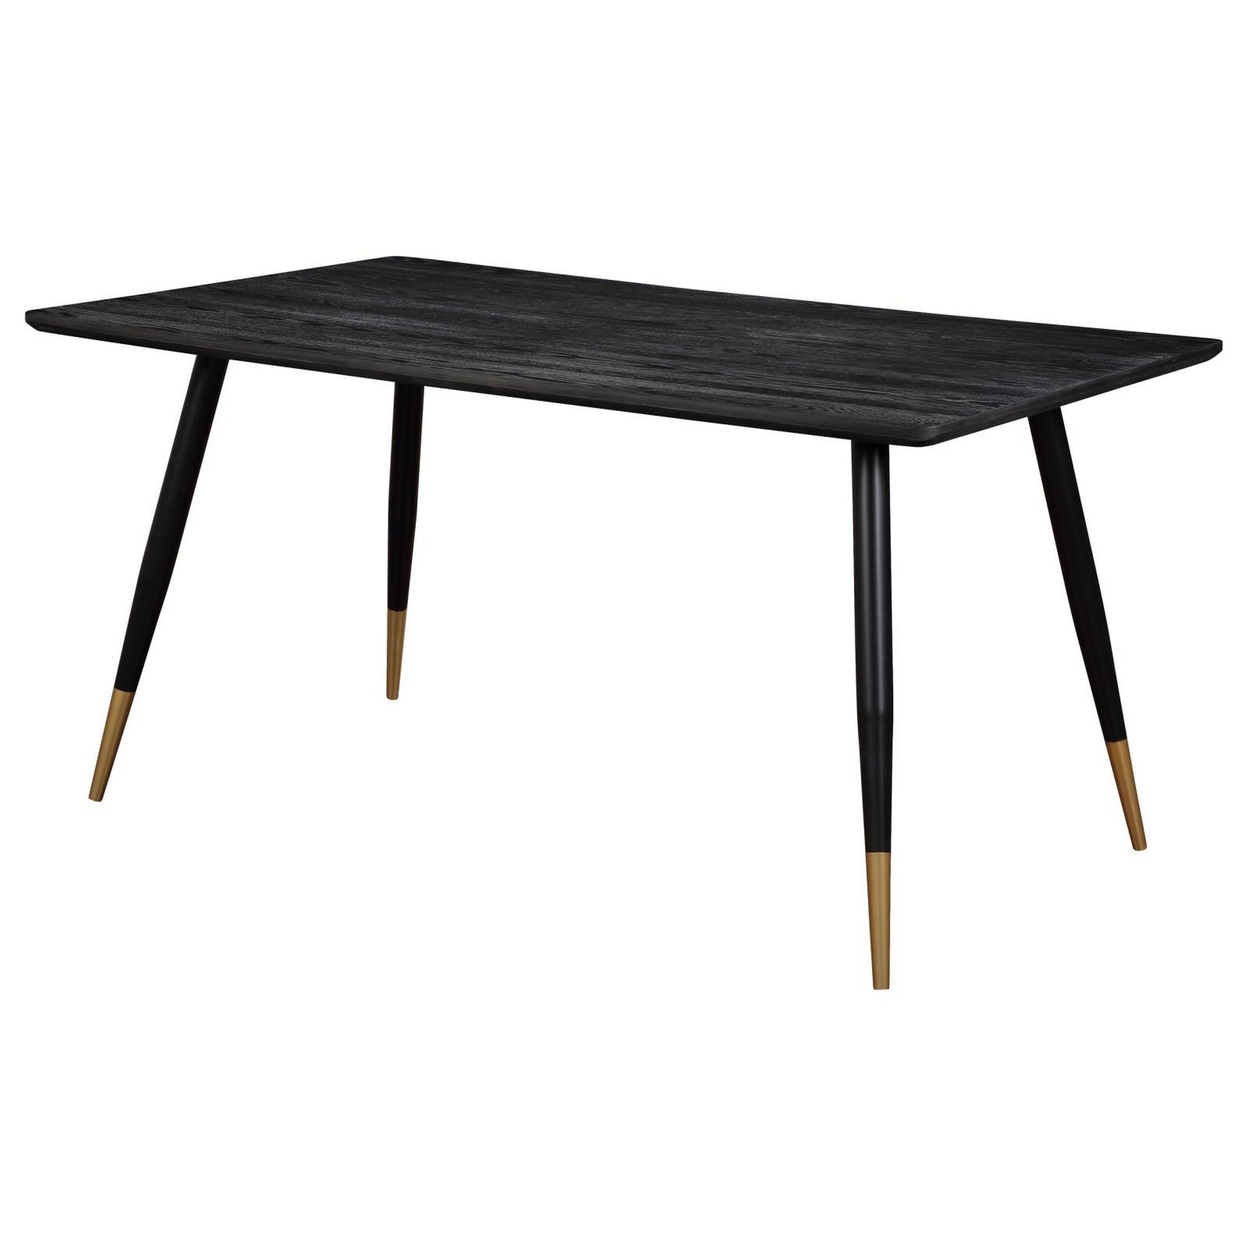 60 Inch Dining Table, MDF Tabletop, Rounded Metal Legs, Brass Accents -Saltoro Sherpi